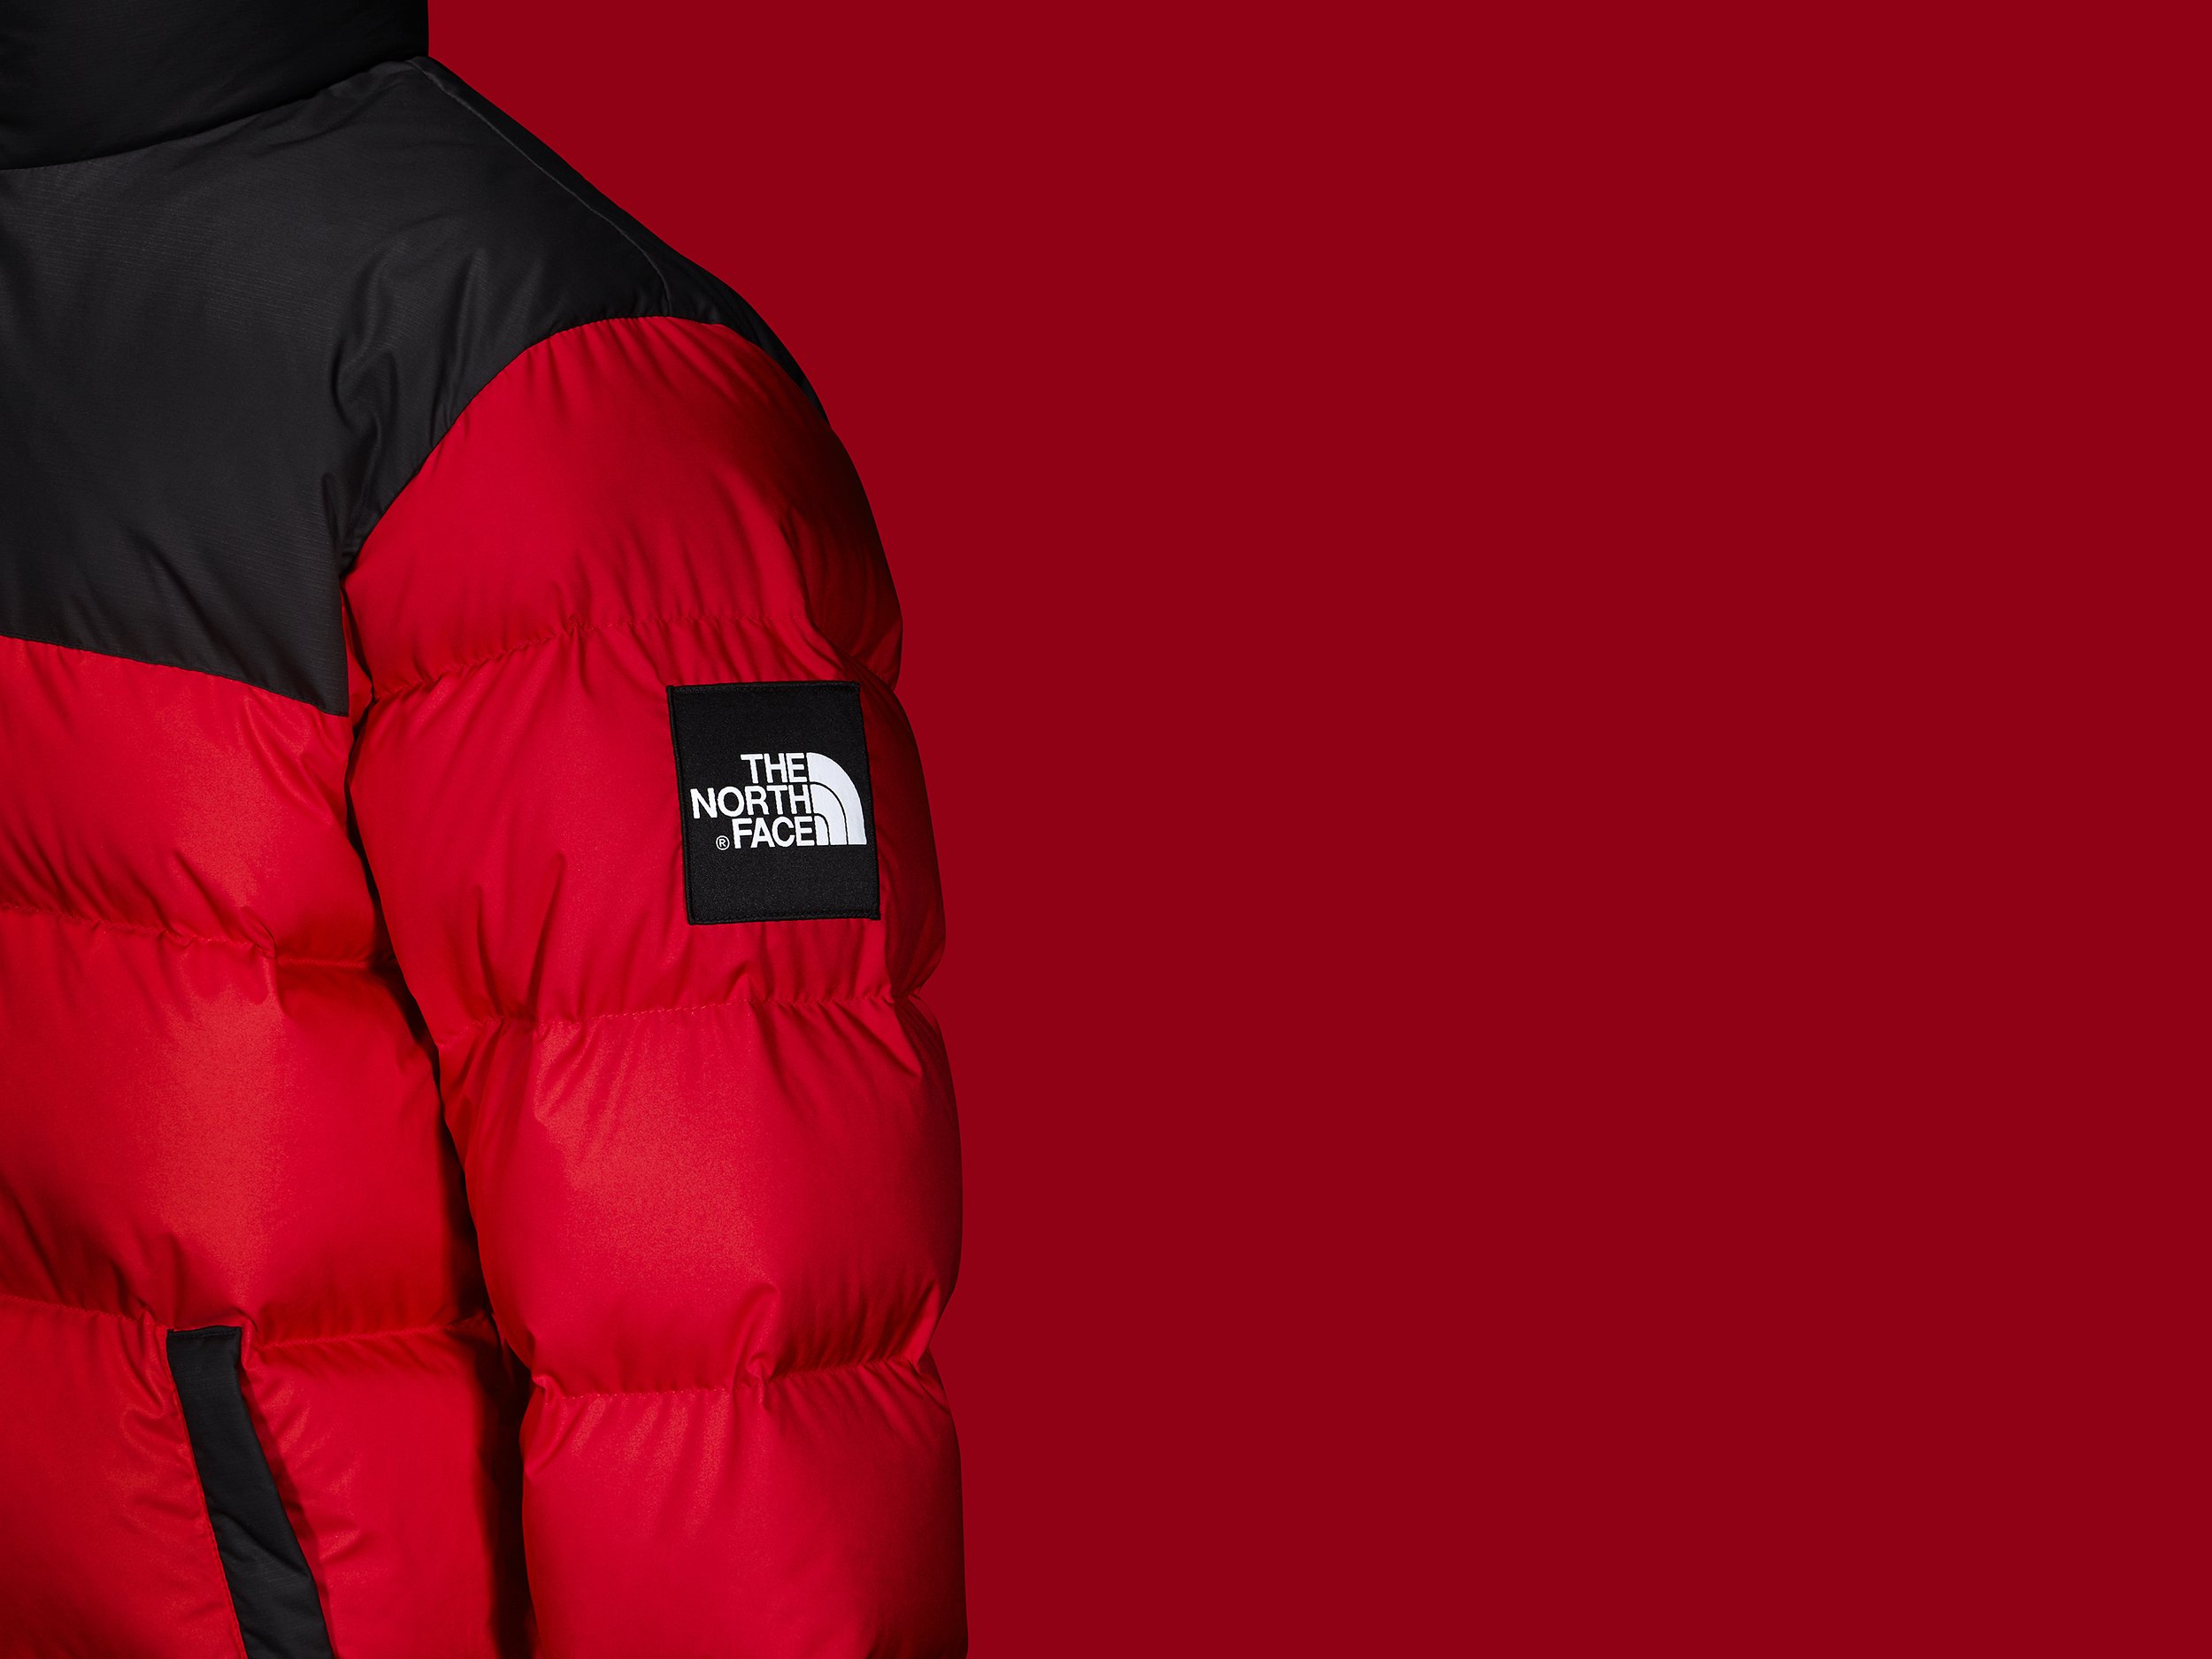 North Face Men's Nupste 2 Jacket in Cardinal Red - product photography by Simon Lyle Ritchie 